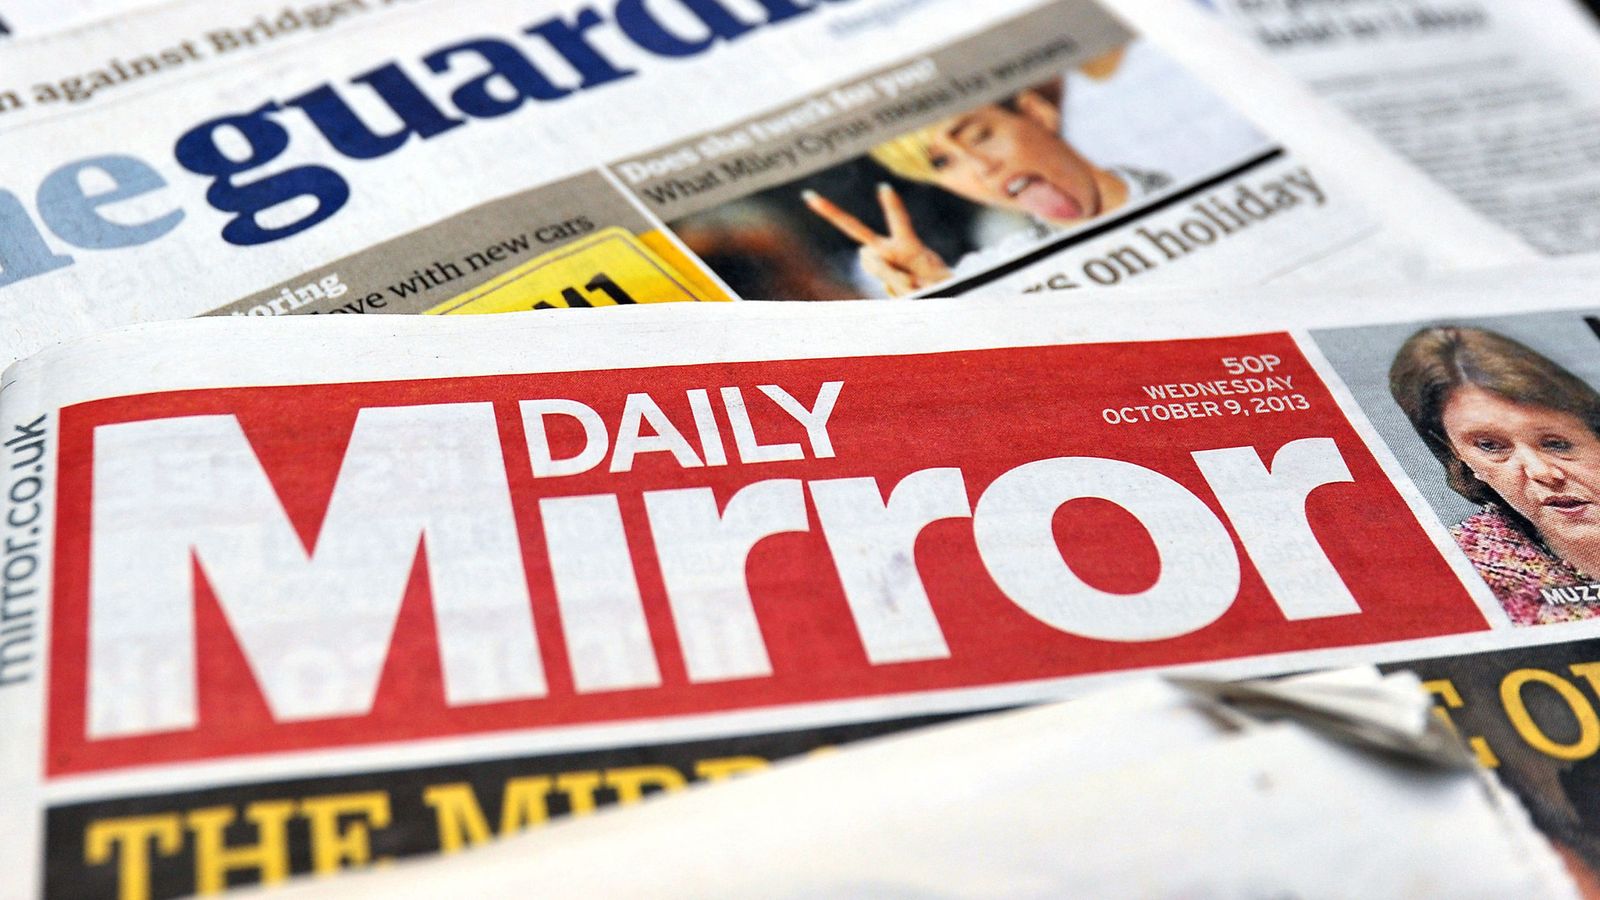 Phone-hacking costs Daily Mirror owner | News | Sky News